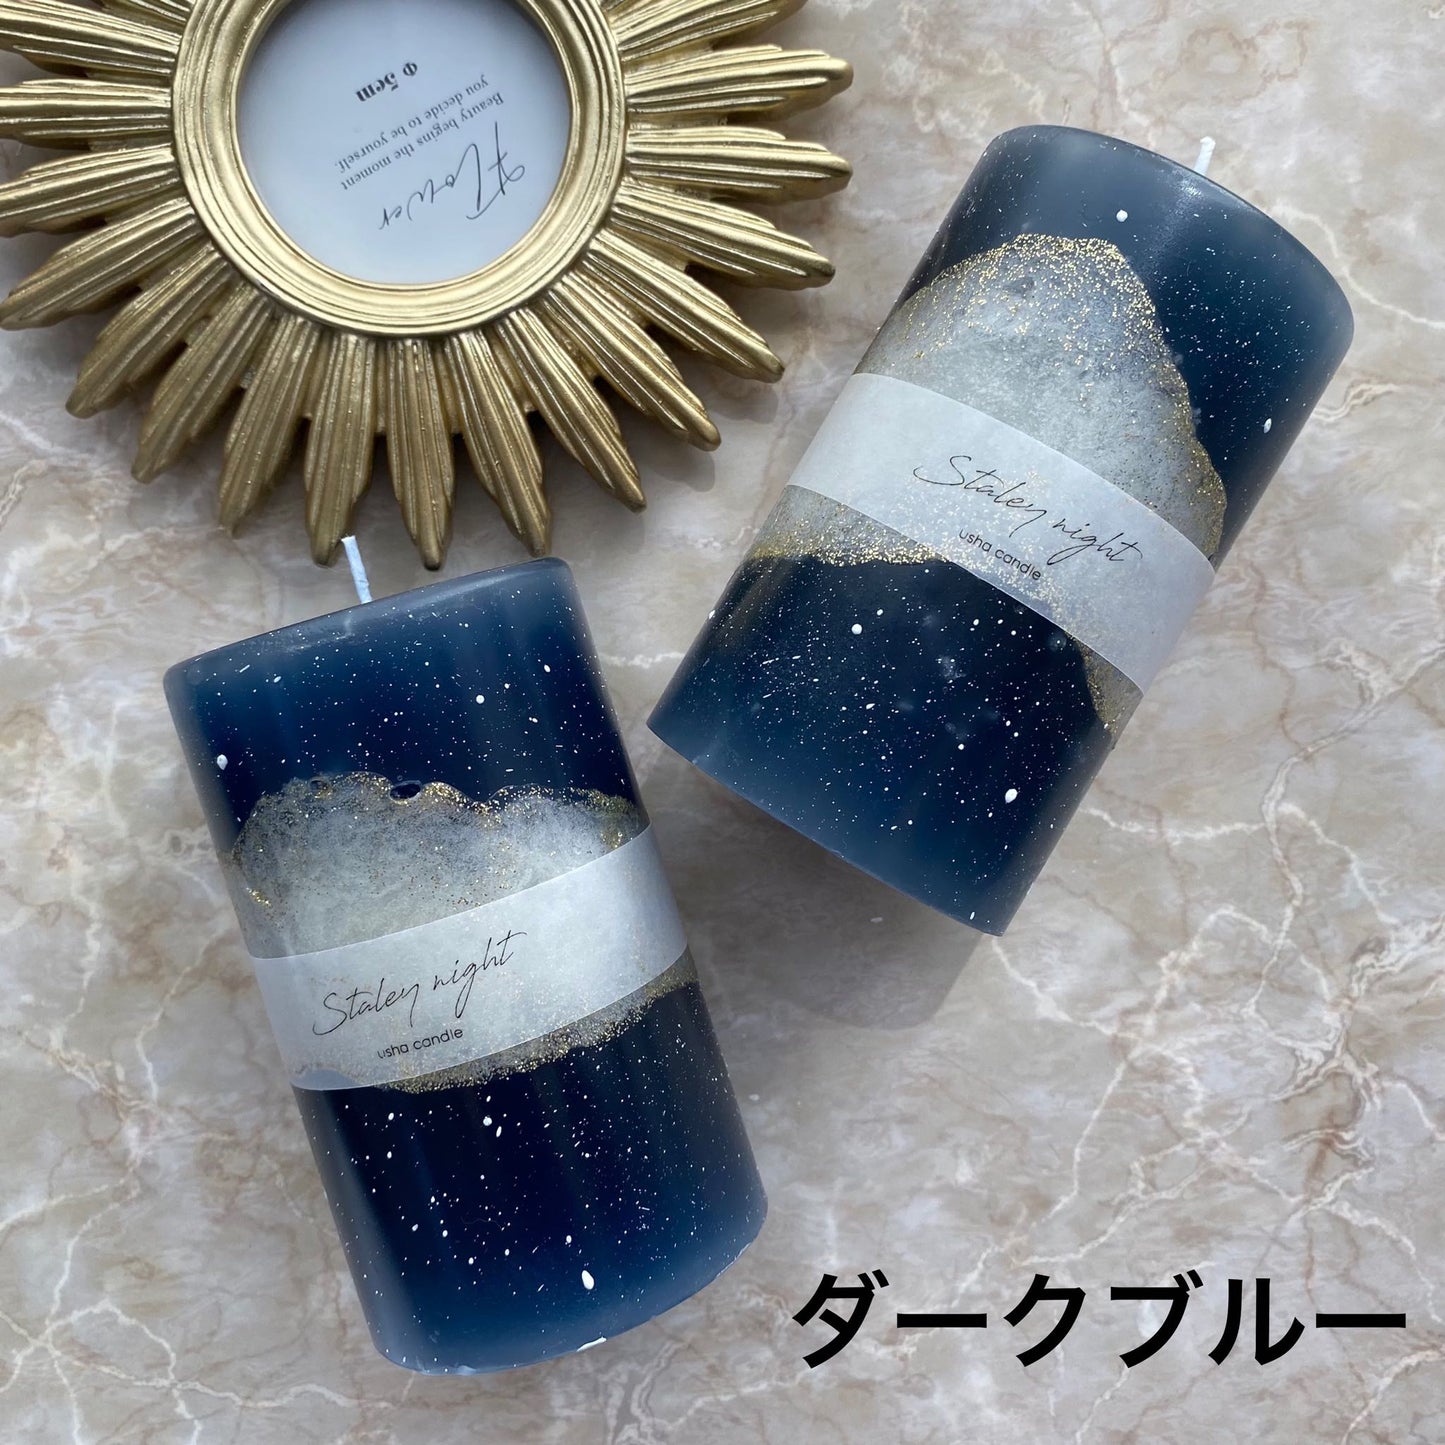 Starry night candle